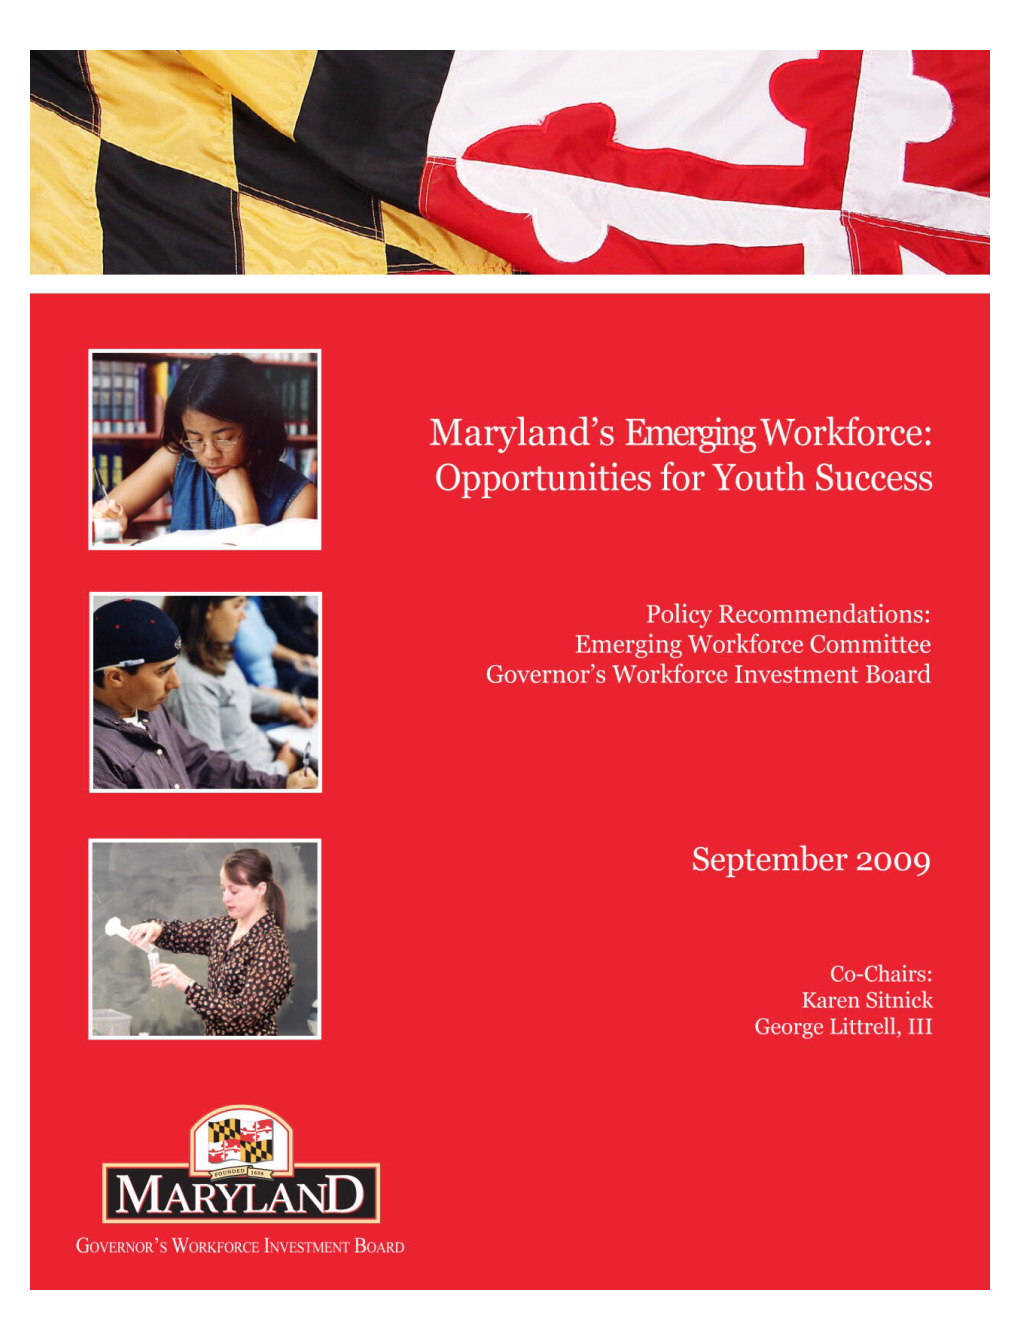 Opportunities for Youth Success